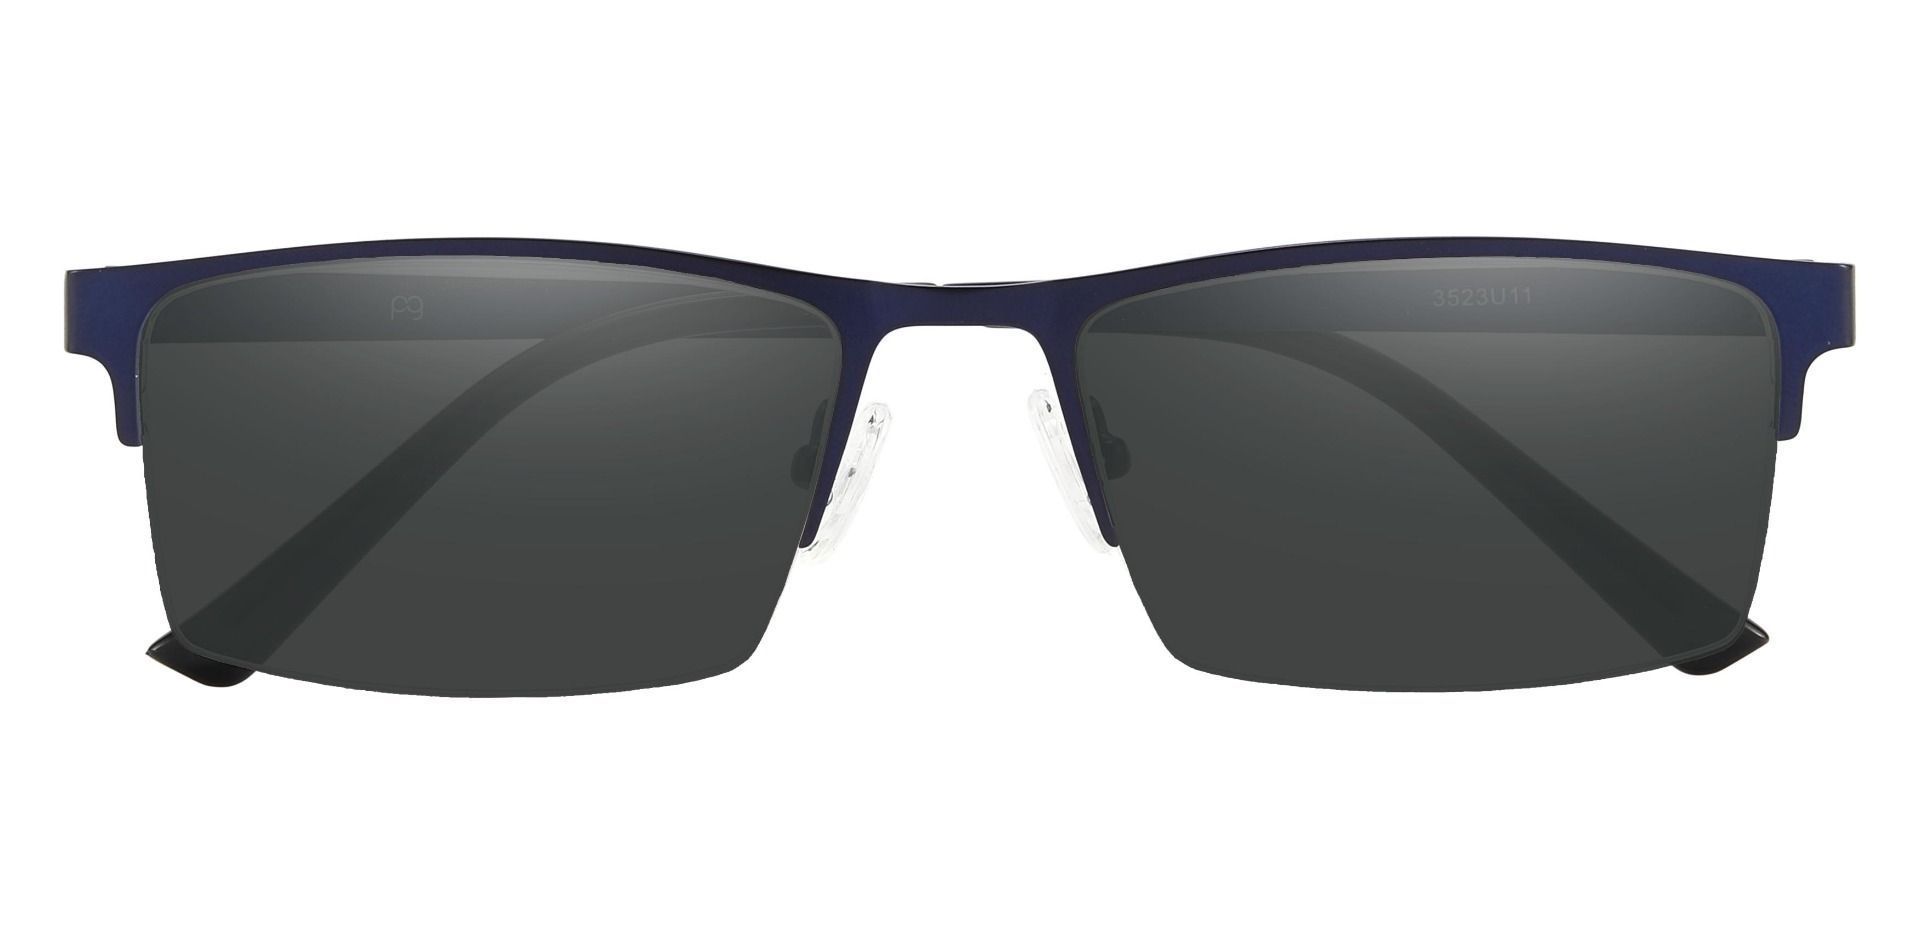 Patrick Rectangle Reading Sunglasses - Blue Frame With Gray Lenses